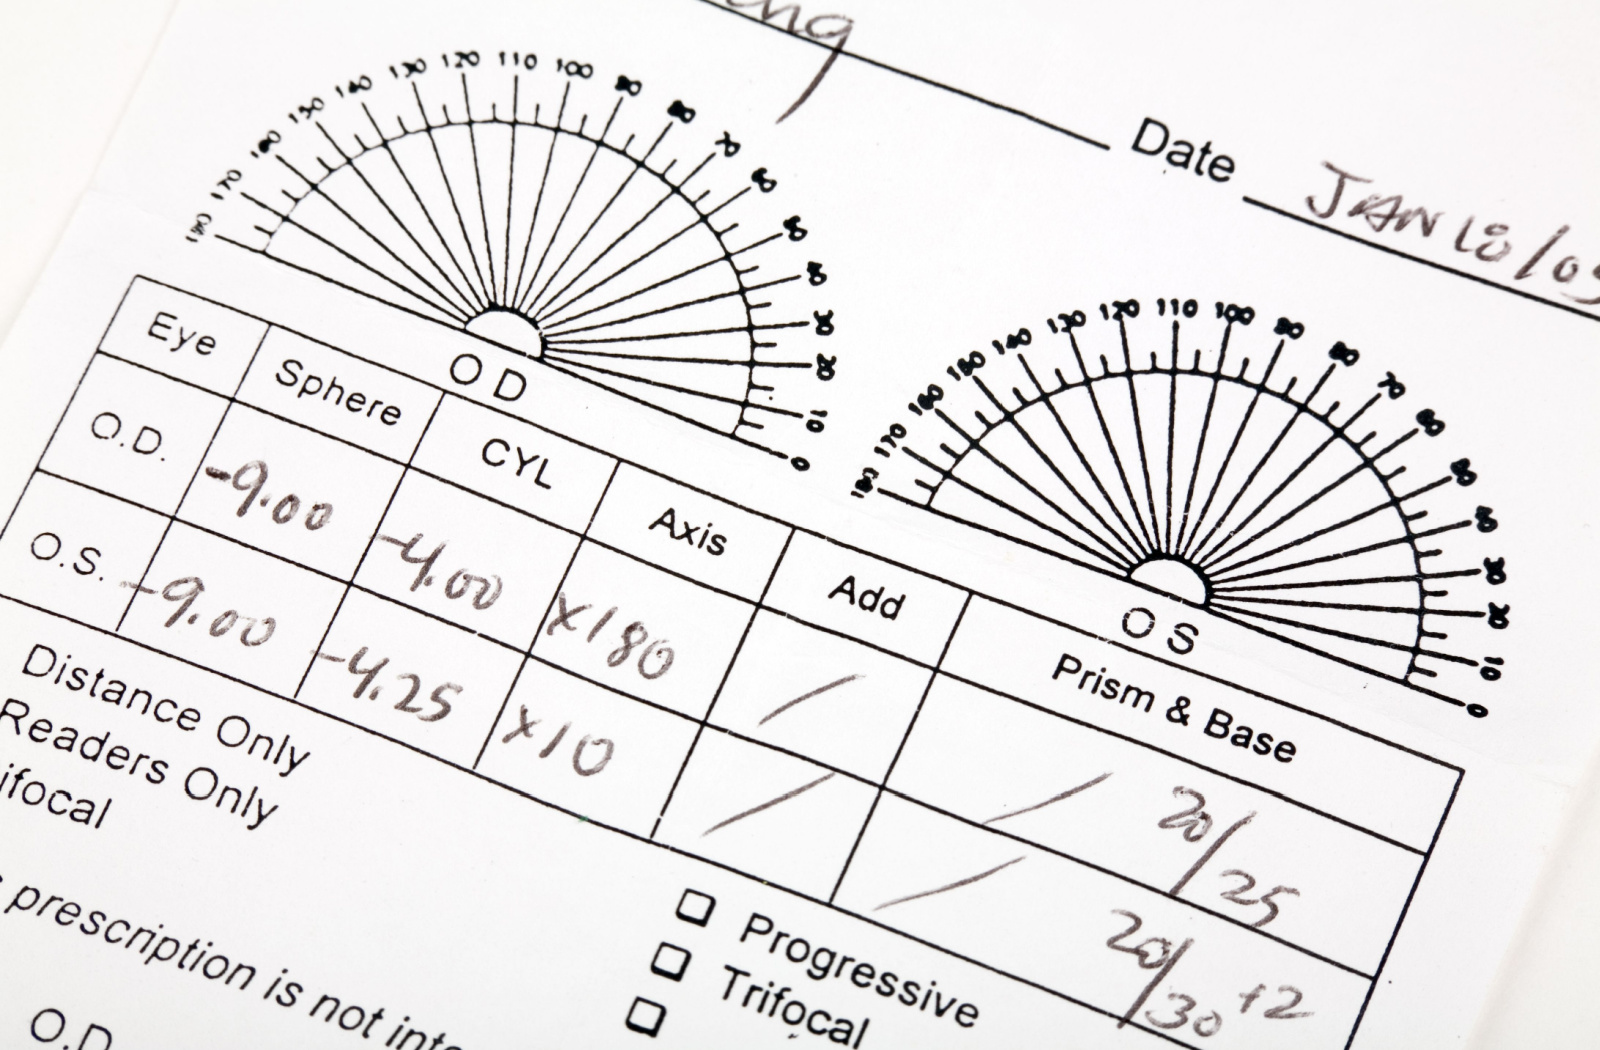 A detailed view of an eyeglass prescription, capturing the specific details and nuances needed for vision correction.